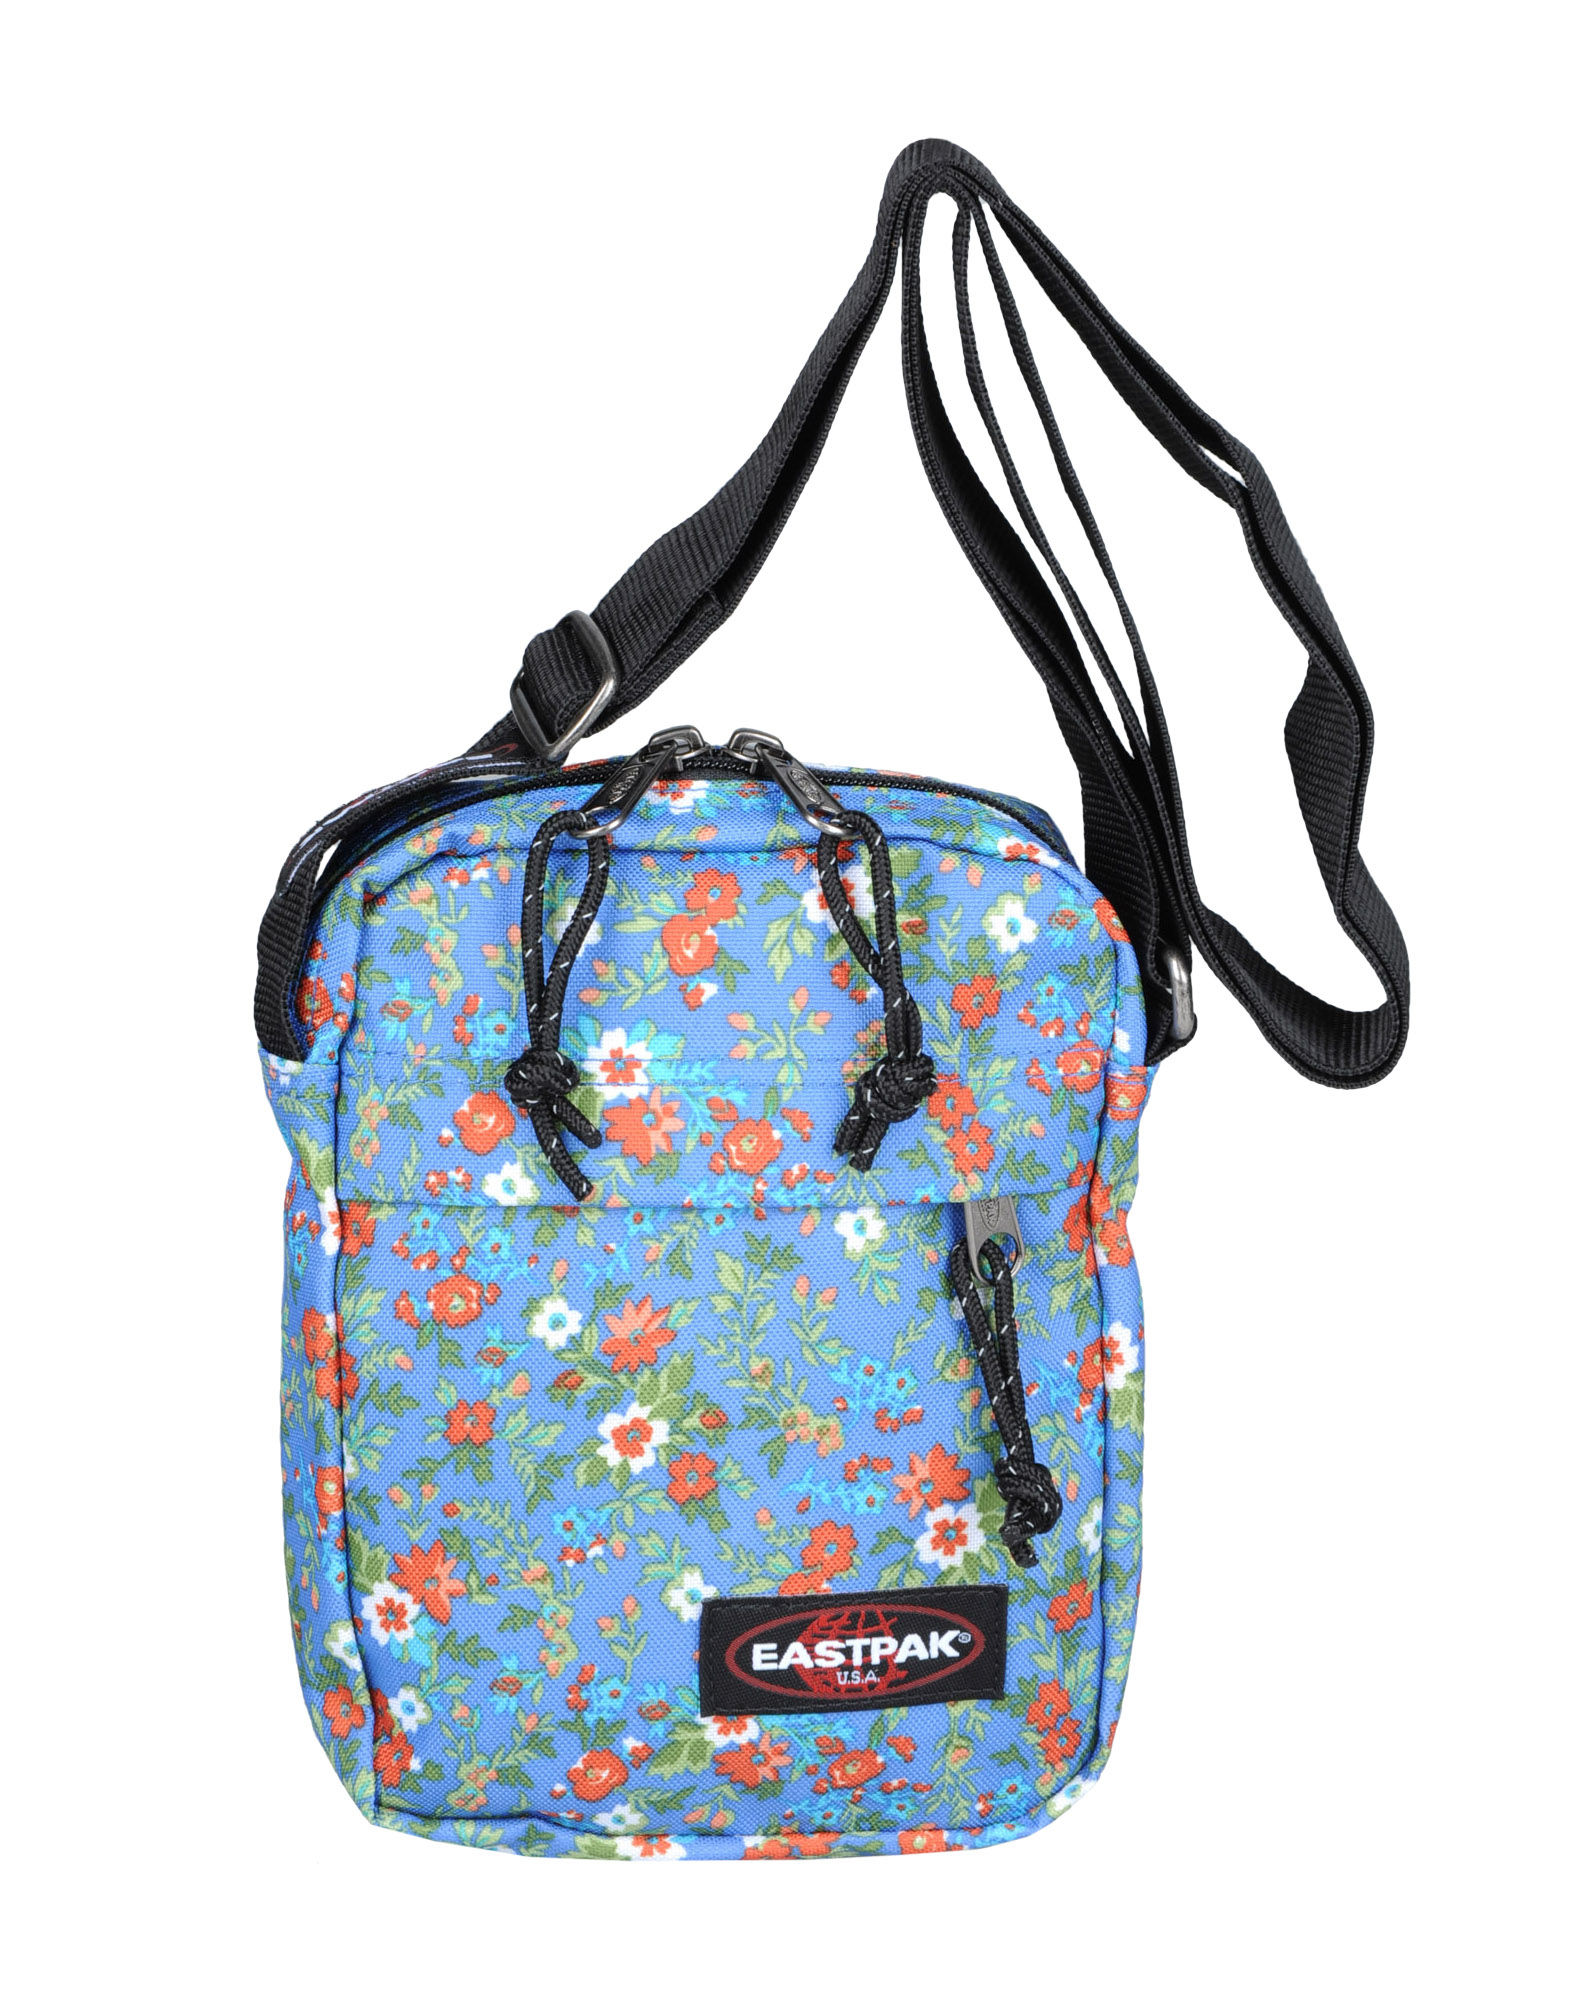 Eastpak Small Fabric Bag in Blue (azure)